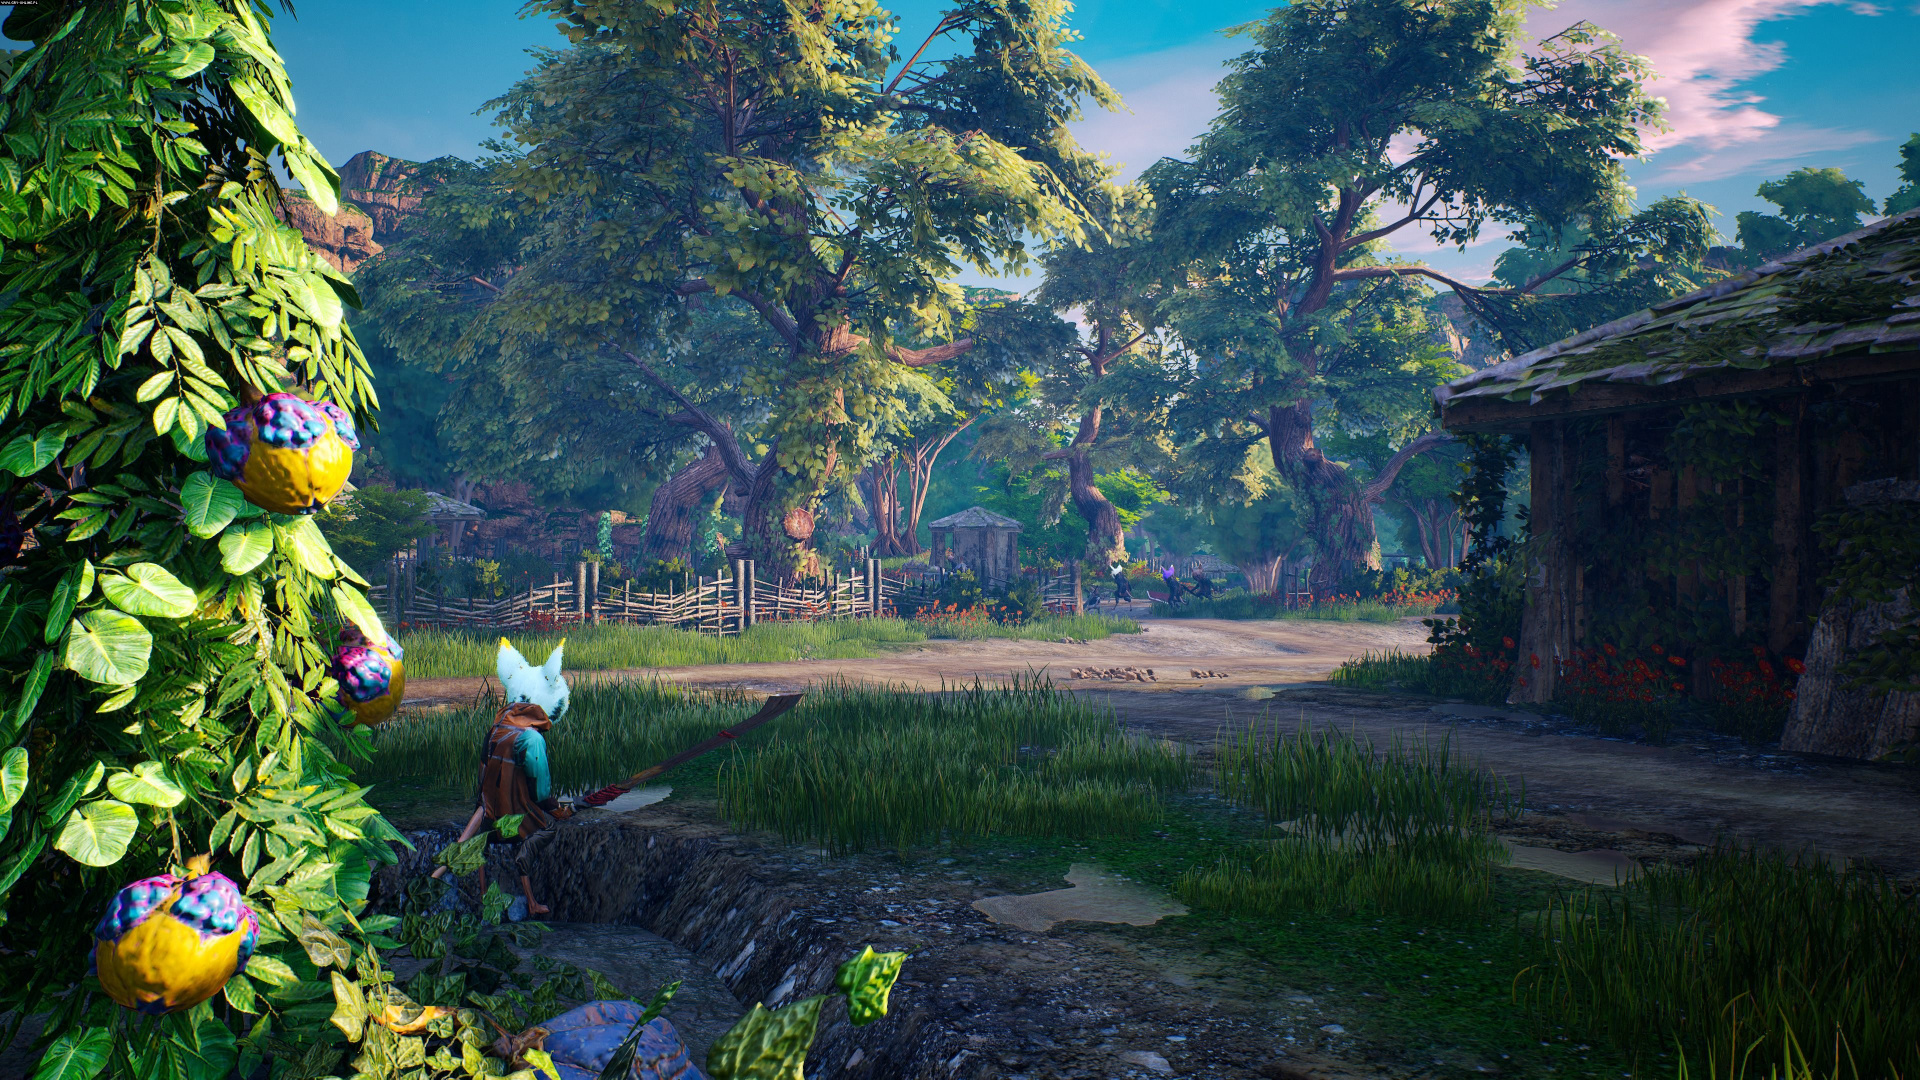 Biomutant, Monde Ouvert, Playstation 4, Nature, Paysage Naturel. Wallpaper in 1920x1080 Resolution